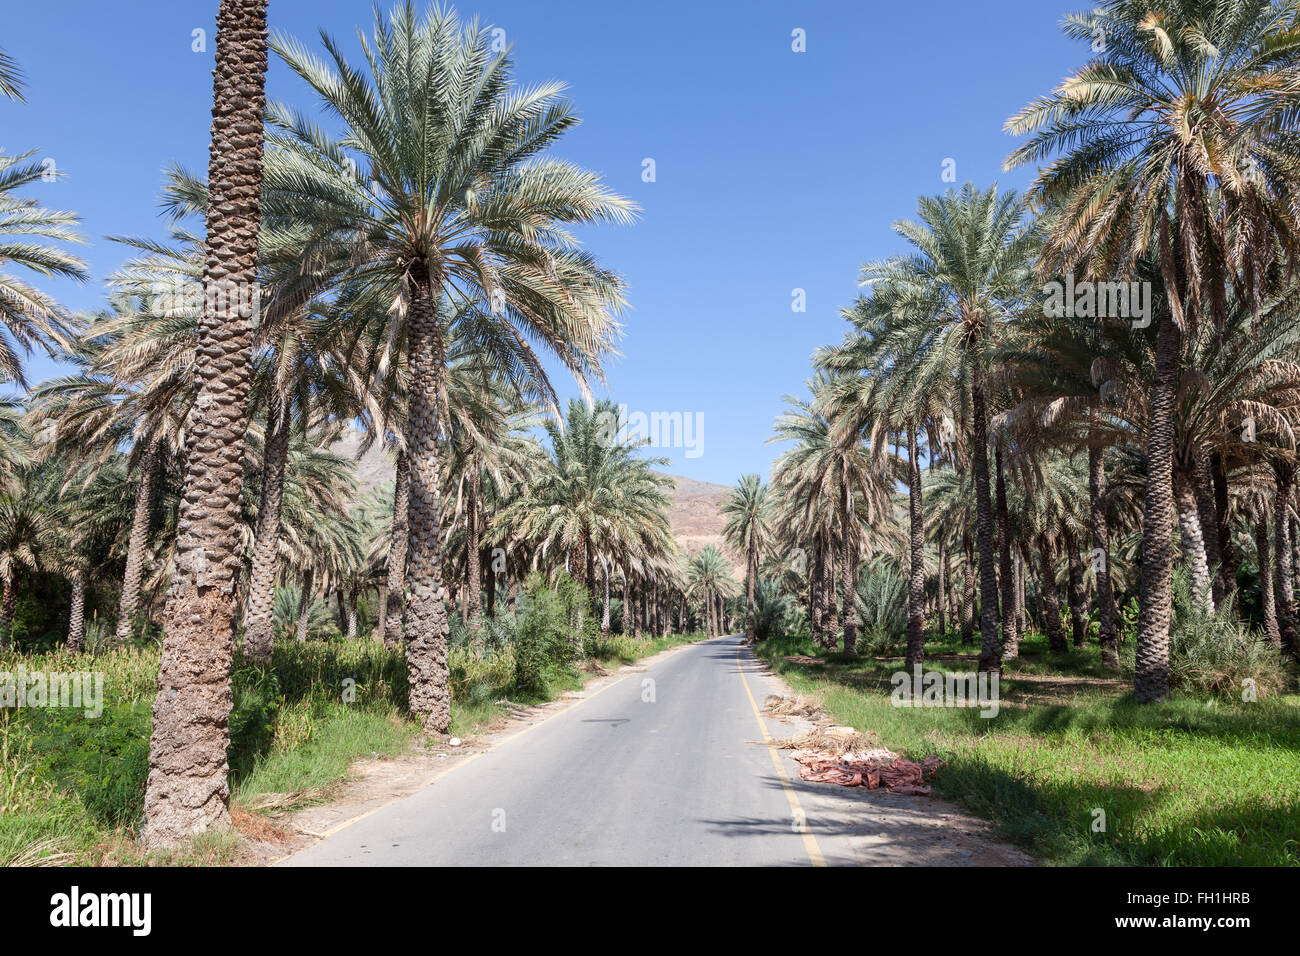 Date palm trees in an oasis near Nizwa. Sultanate of Oman, Middle East Stock Photo